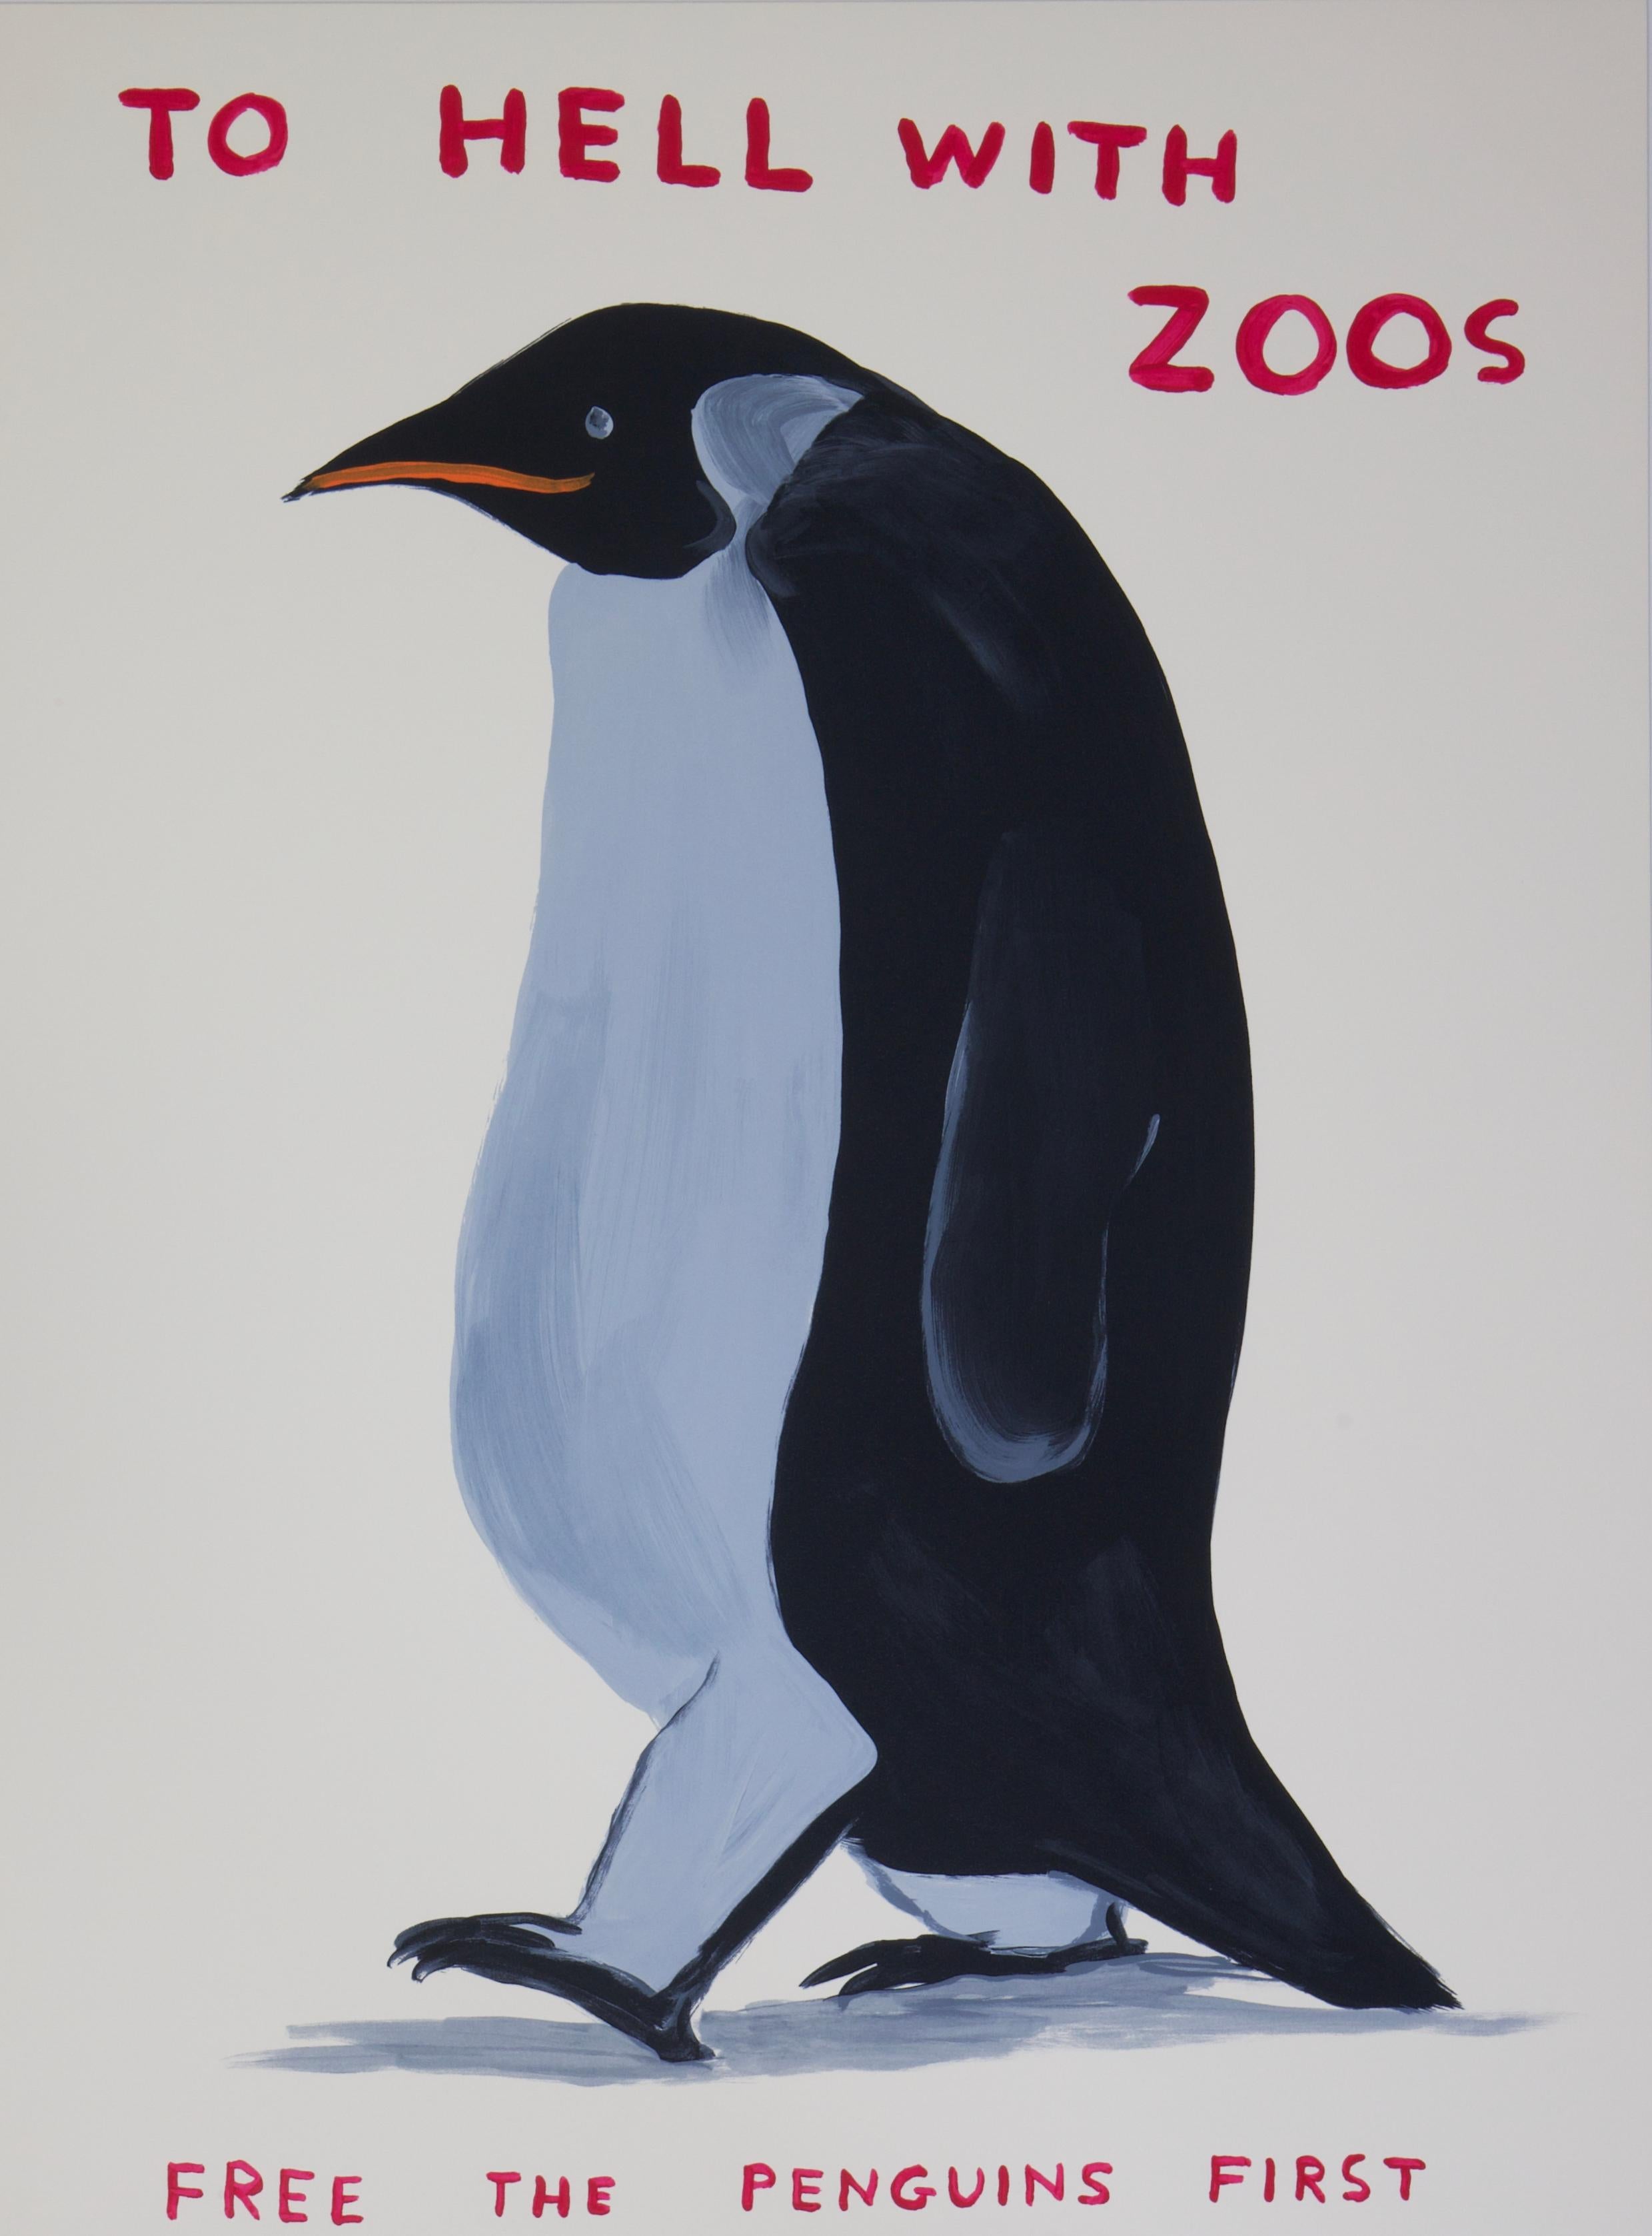 To Hell With Zoos - Print by David Shrigley